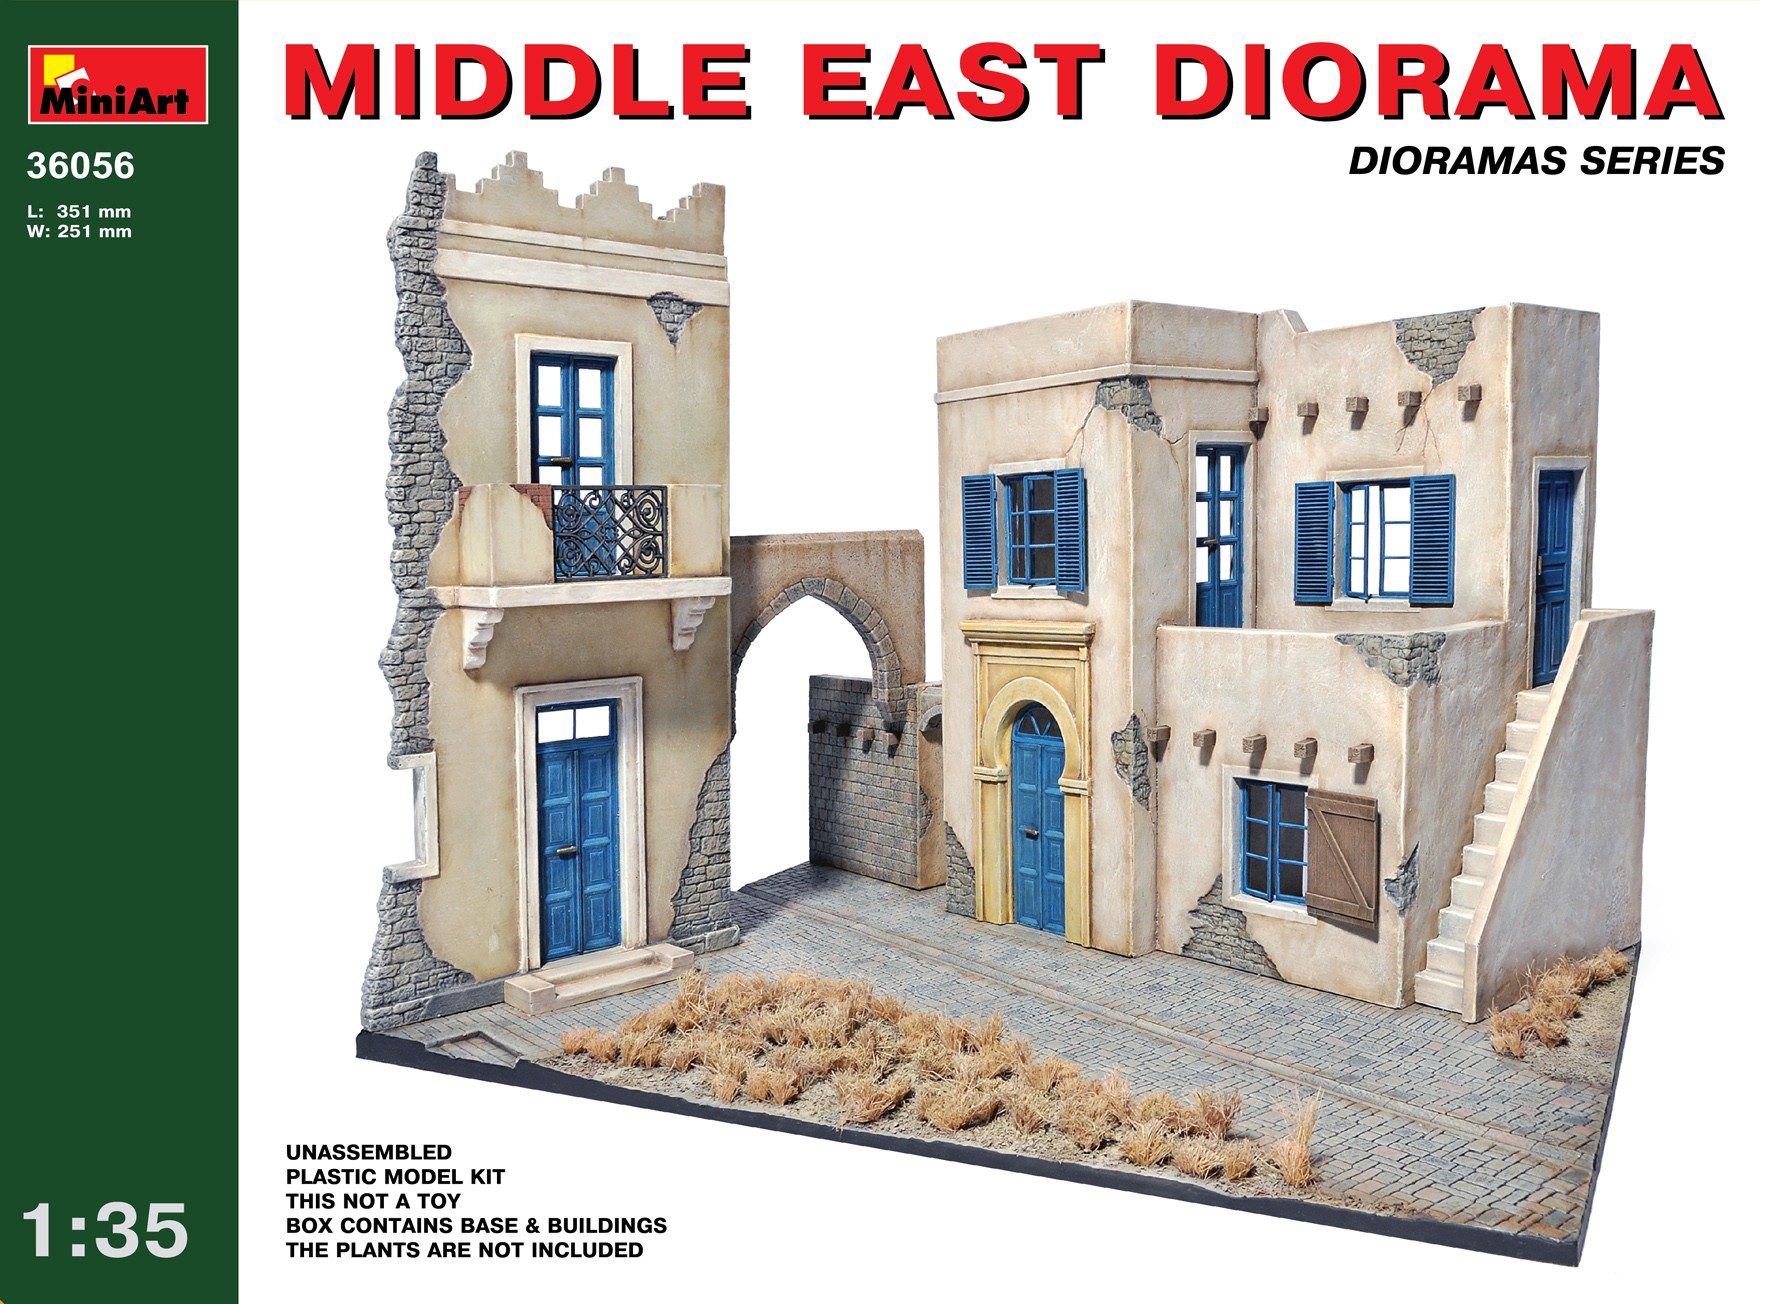 Middle East Diorama Base 56 by MiniArt